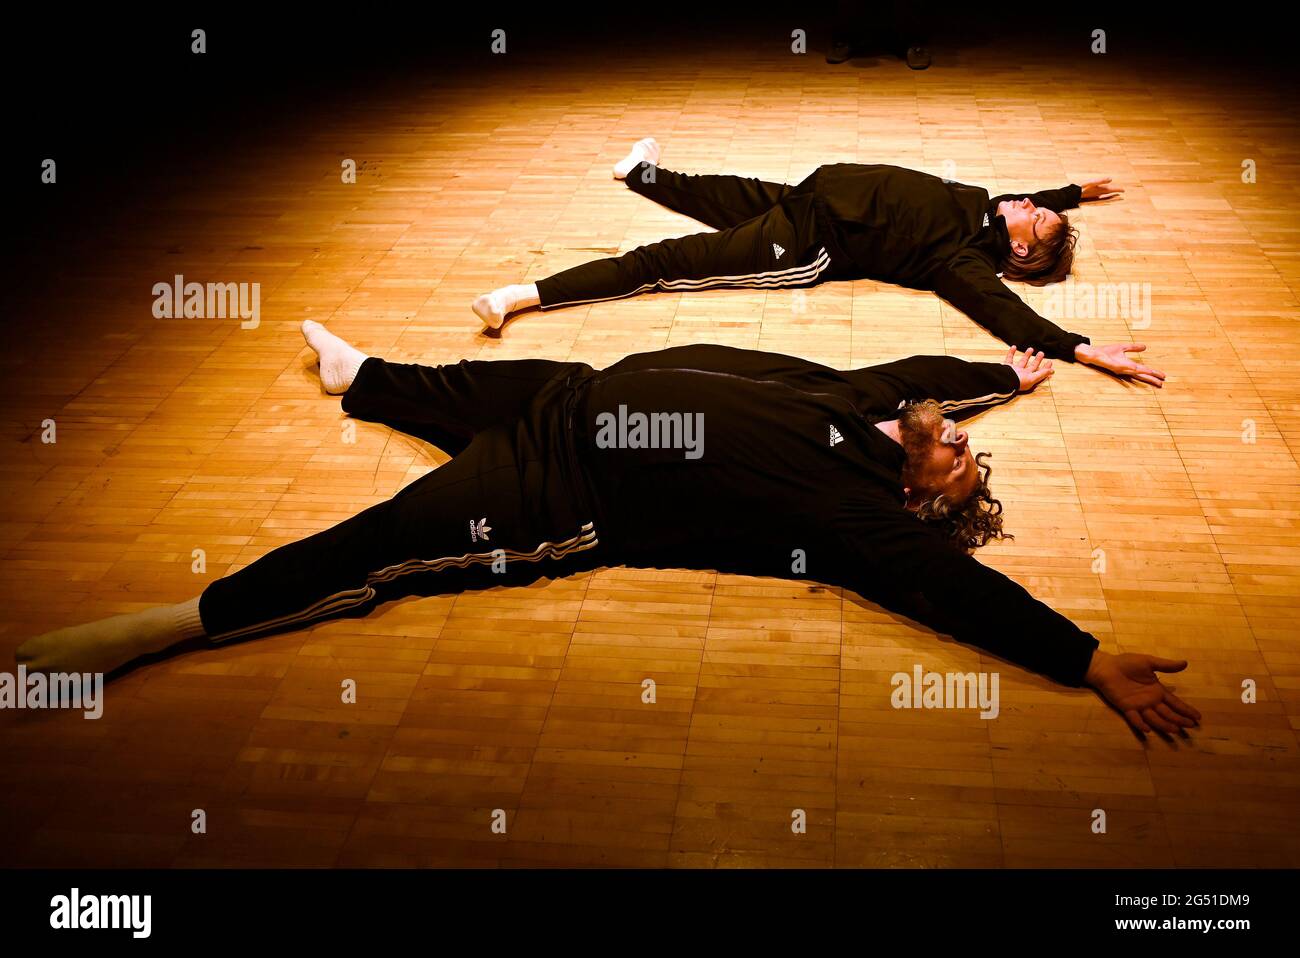 London, UK. 24th June, 2021. Wild Card: Christopher Matthews/formed view my body's an exhibition at Sadlers Wells Theatre London UK. Credit Leo Mason Alamy News Performed by Christopher Matthews & Janine Harrington Credit: Leo Mason sports/Alamy Live News Stock Photo